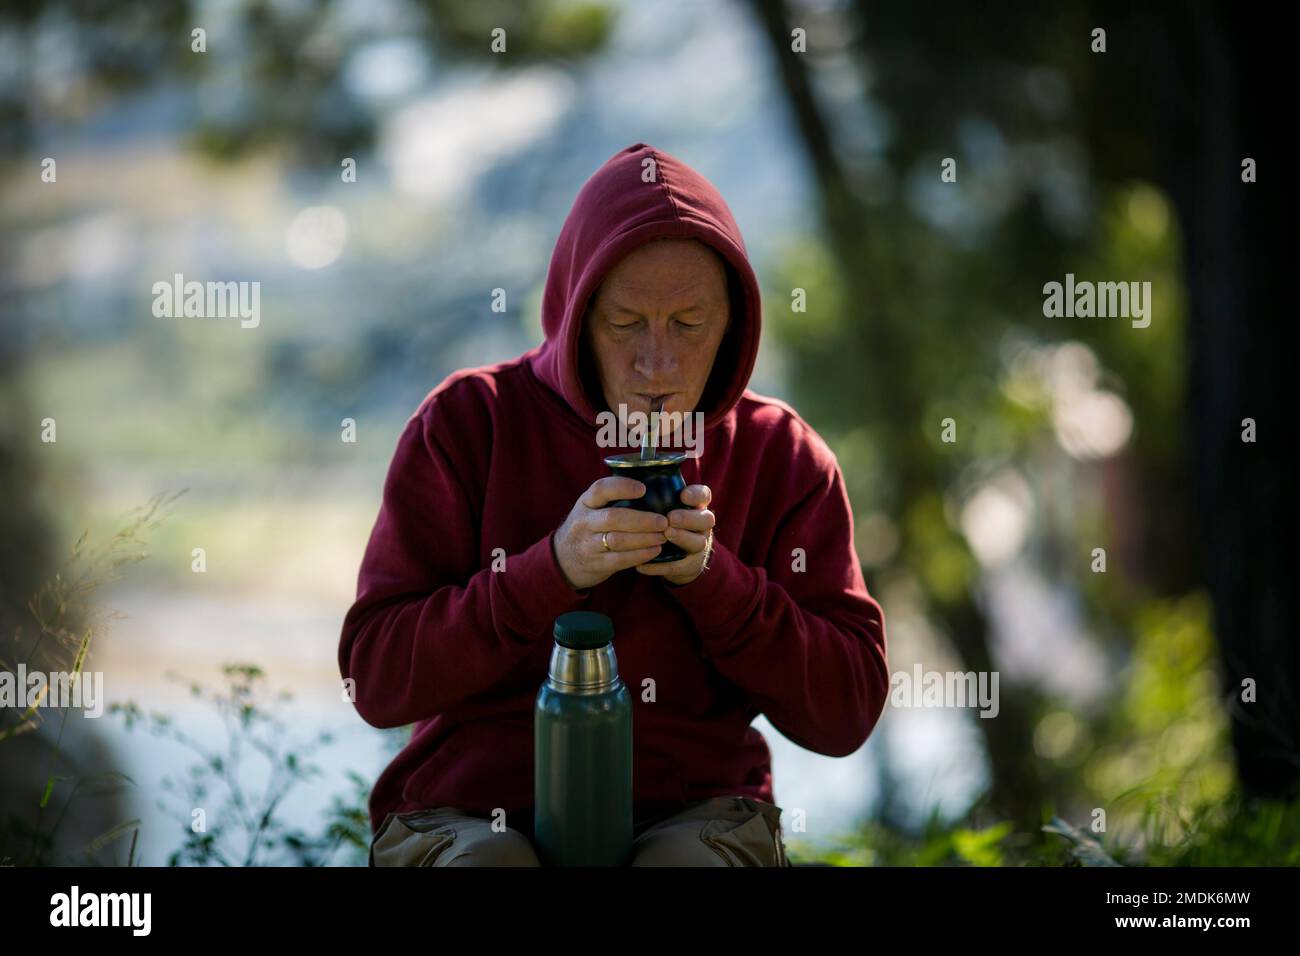 A man drinks mate by a Mate cup in the Park. Stock Photo